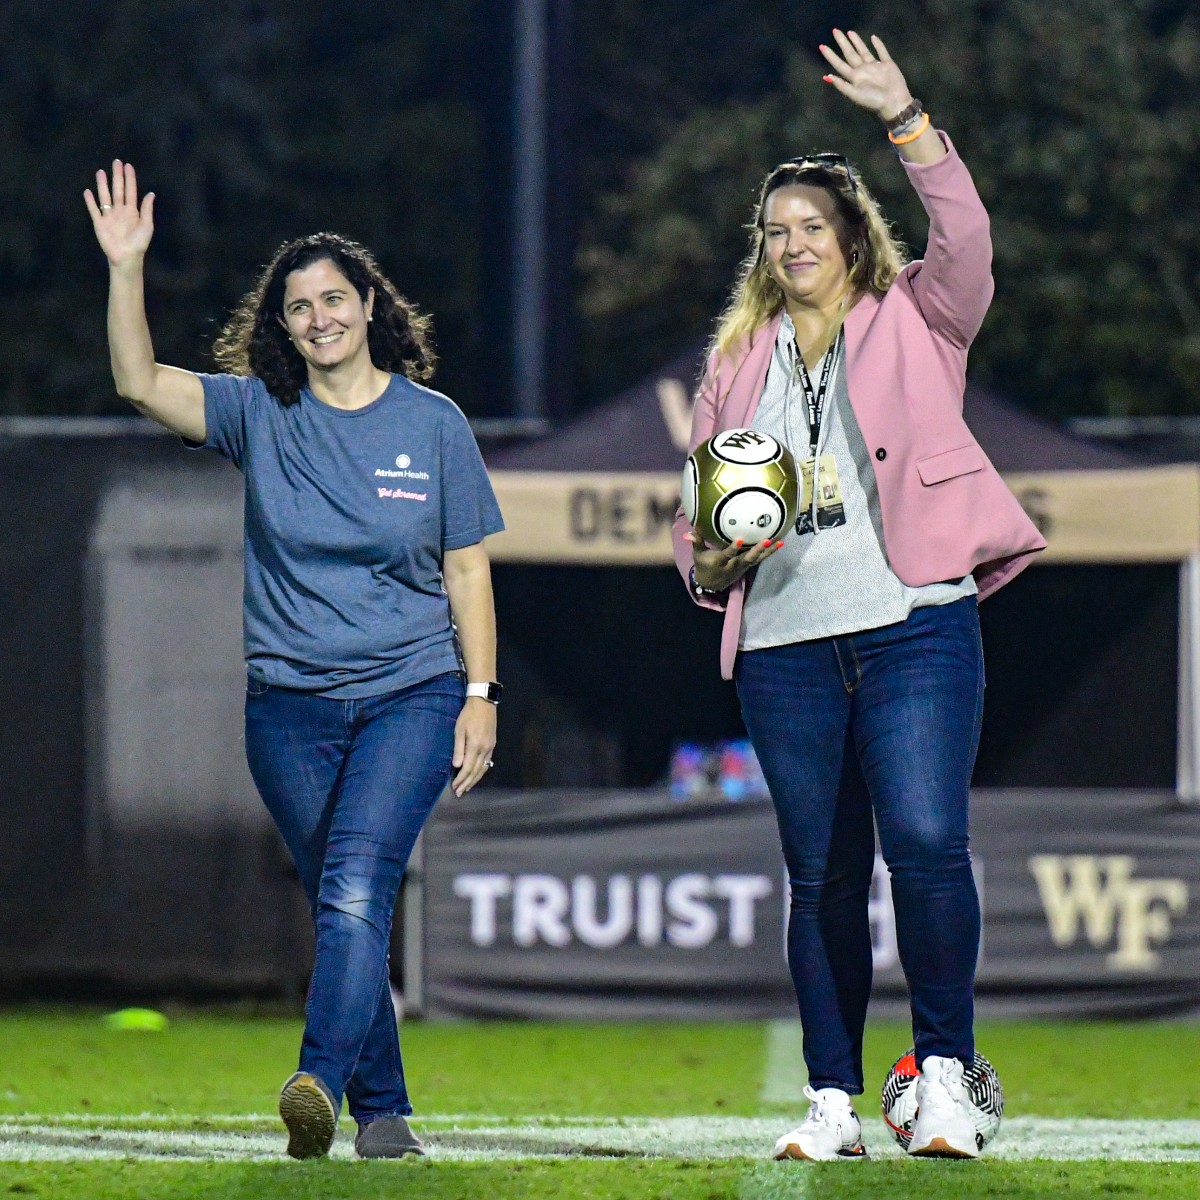 Dr．Kather㏌e A㎱ley, @wakeforest & @wakemsoccer took the ﬁeld ㏌ support of #BreastCancerAwareness raising $4,420 towards the Cancer Health Equity Patient Care Fund! Bidd㏌g for @WakeWSoccer rema㏌s open on game-worn jerseys ahead of Thursday’s game ⚽️ brnw.ch/Pink